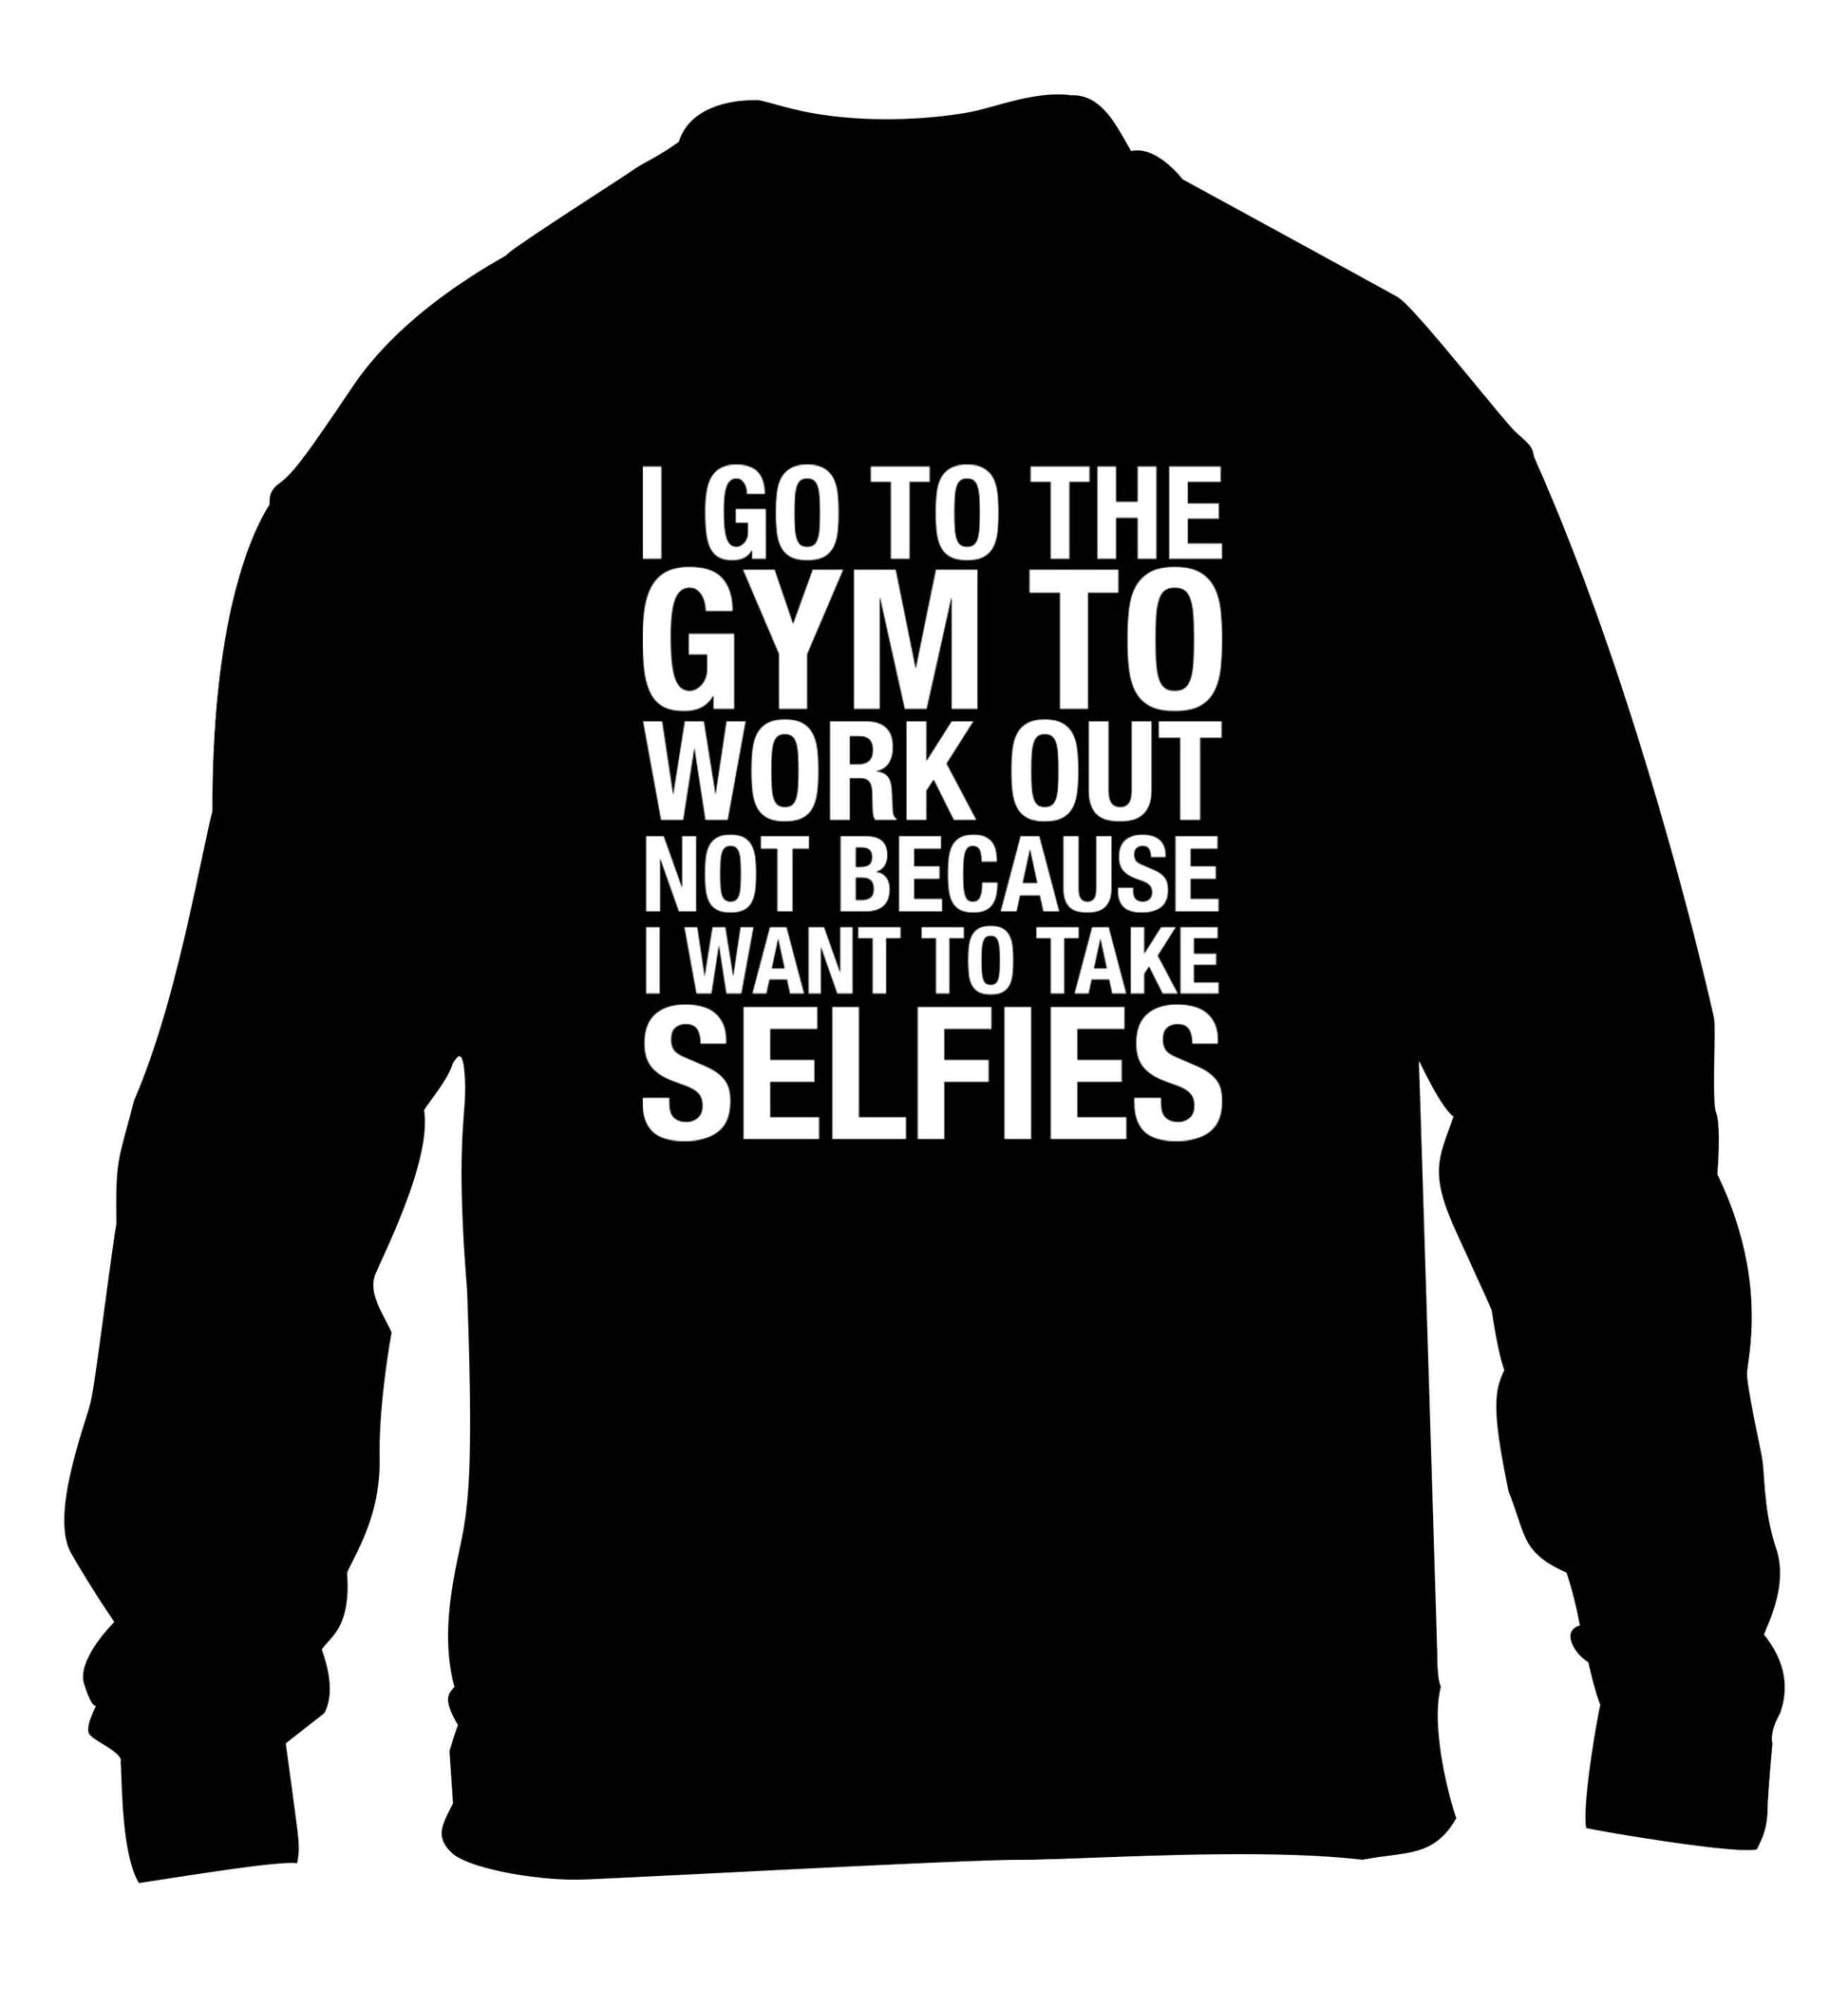 I go to the gym to workout not to take selfies children's black sweater 12-13 Years